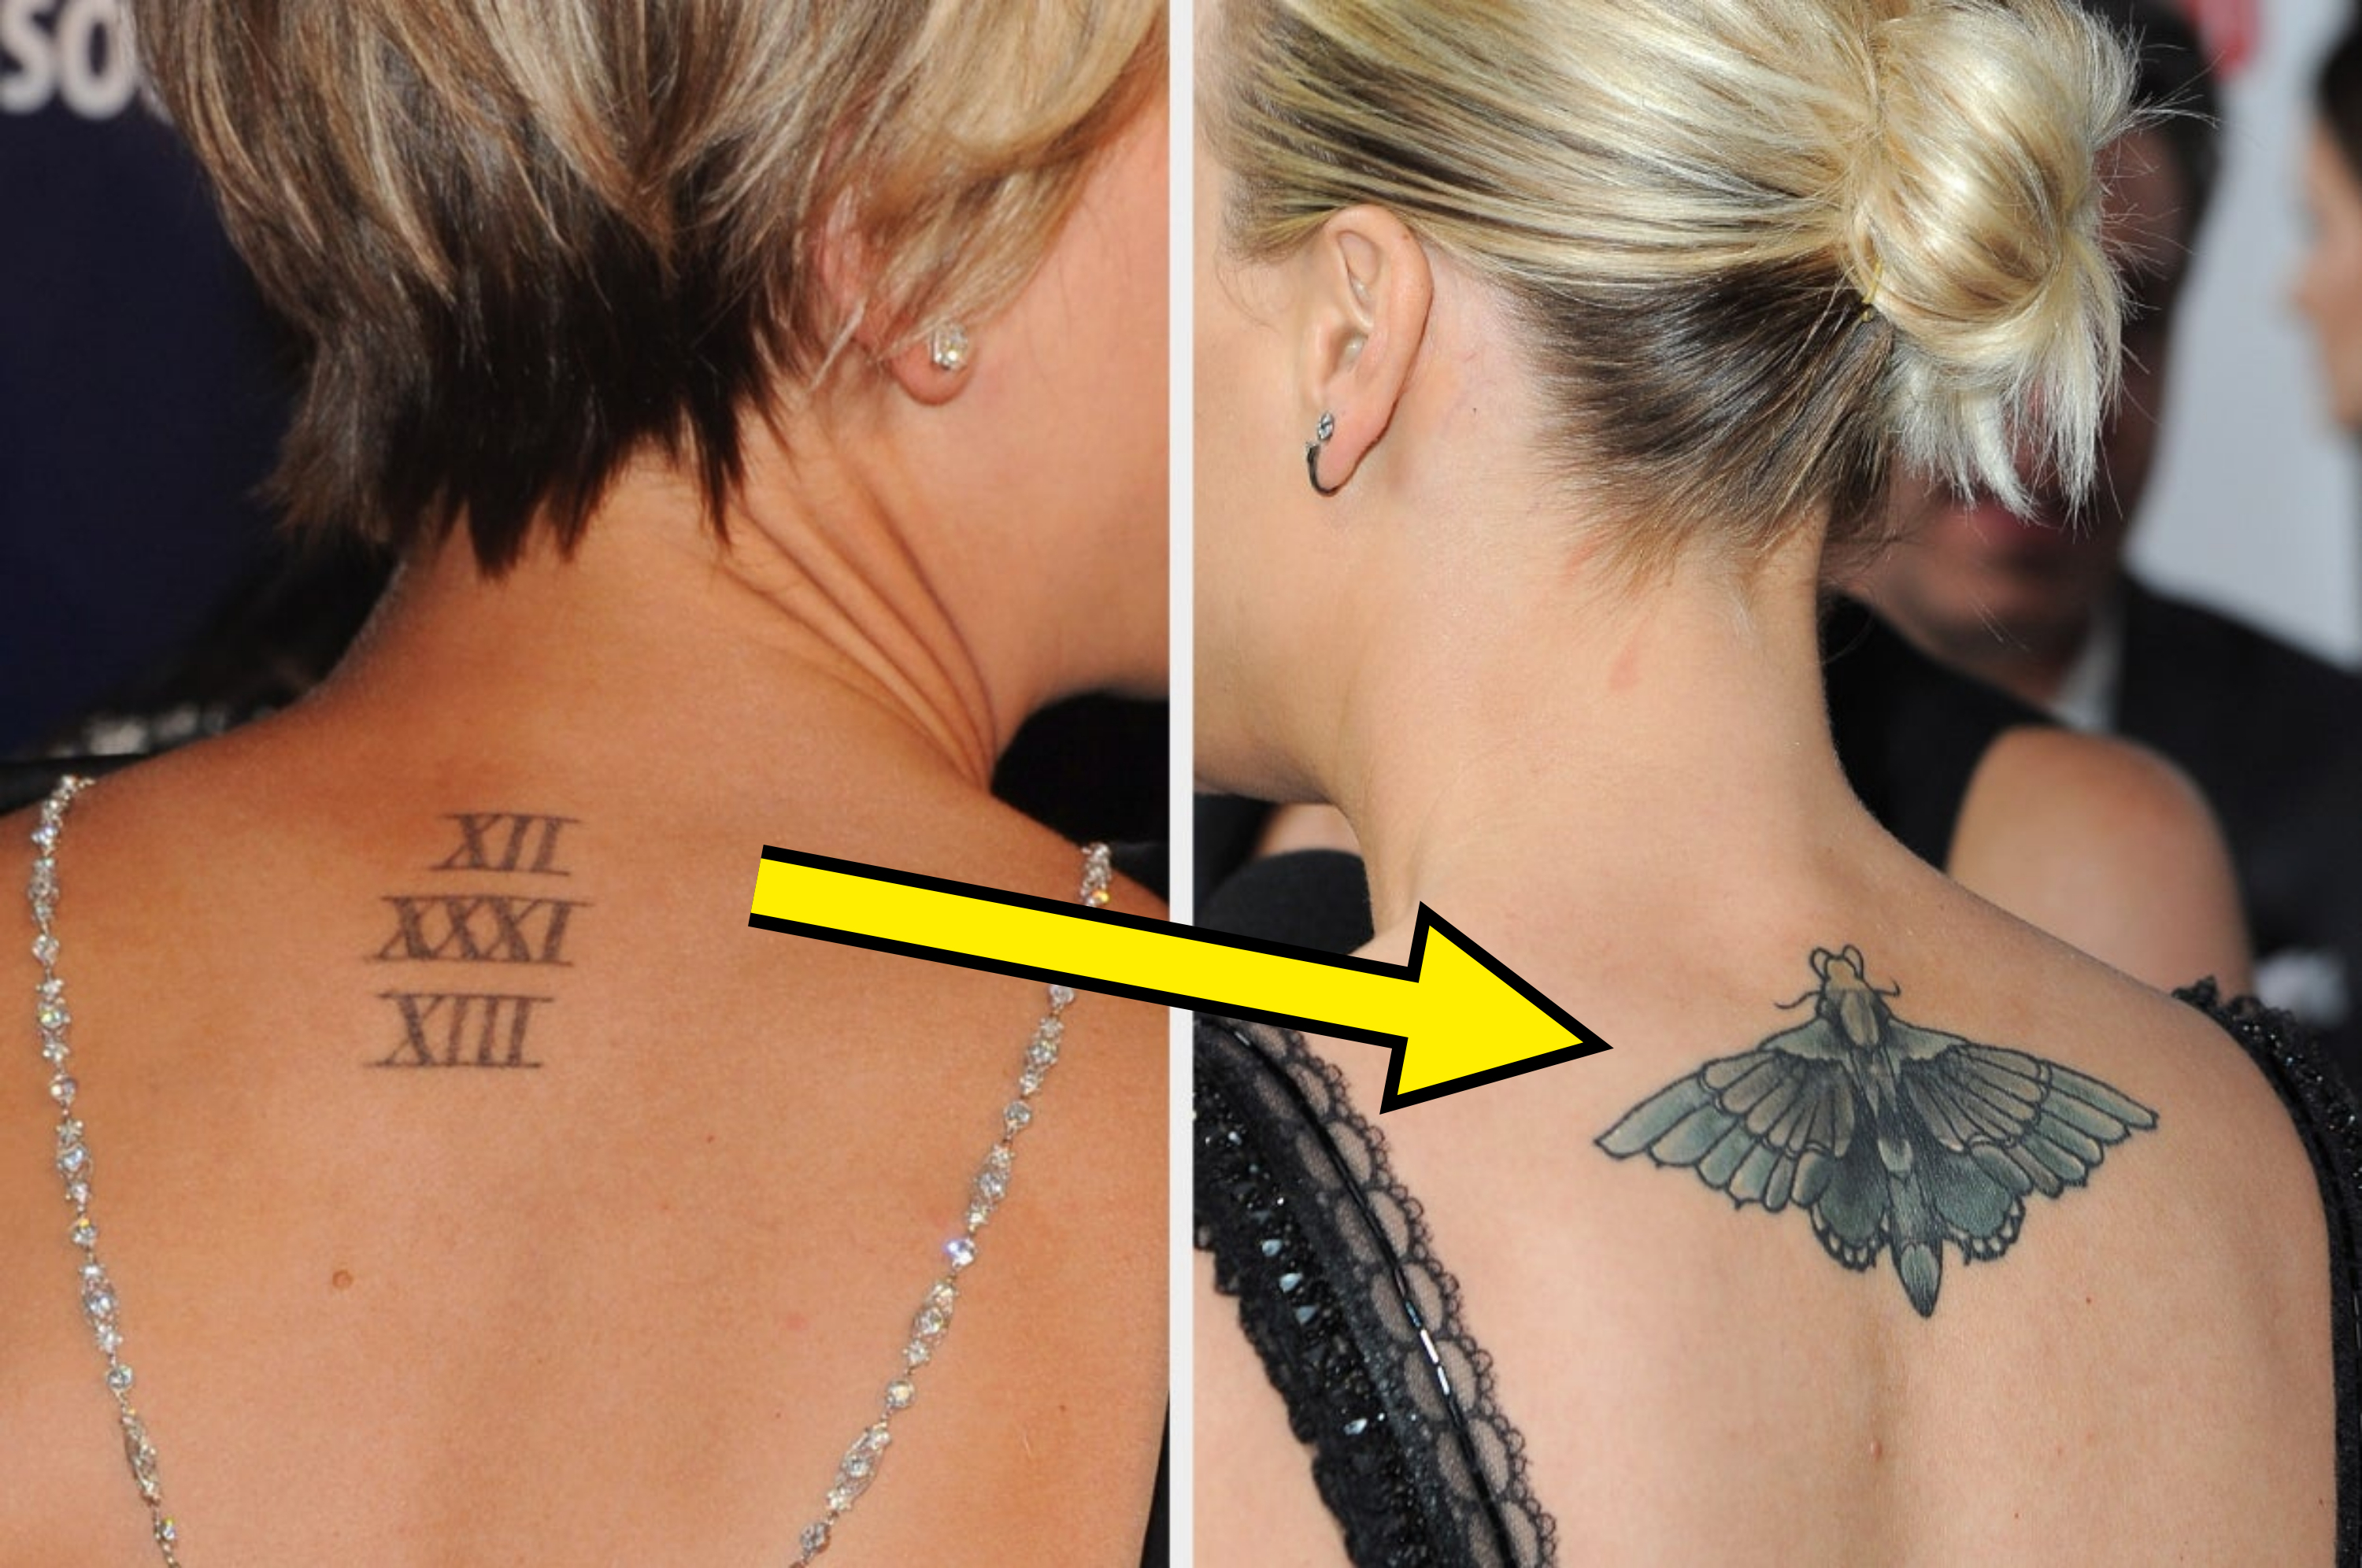 Celebrities That Got Tattoos Inspired by Family Members